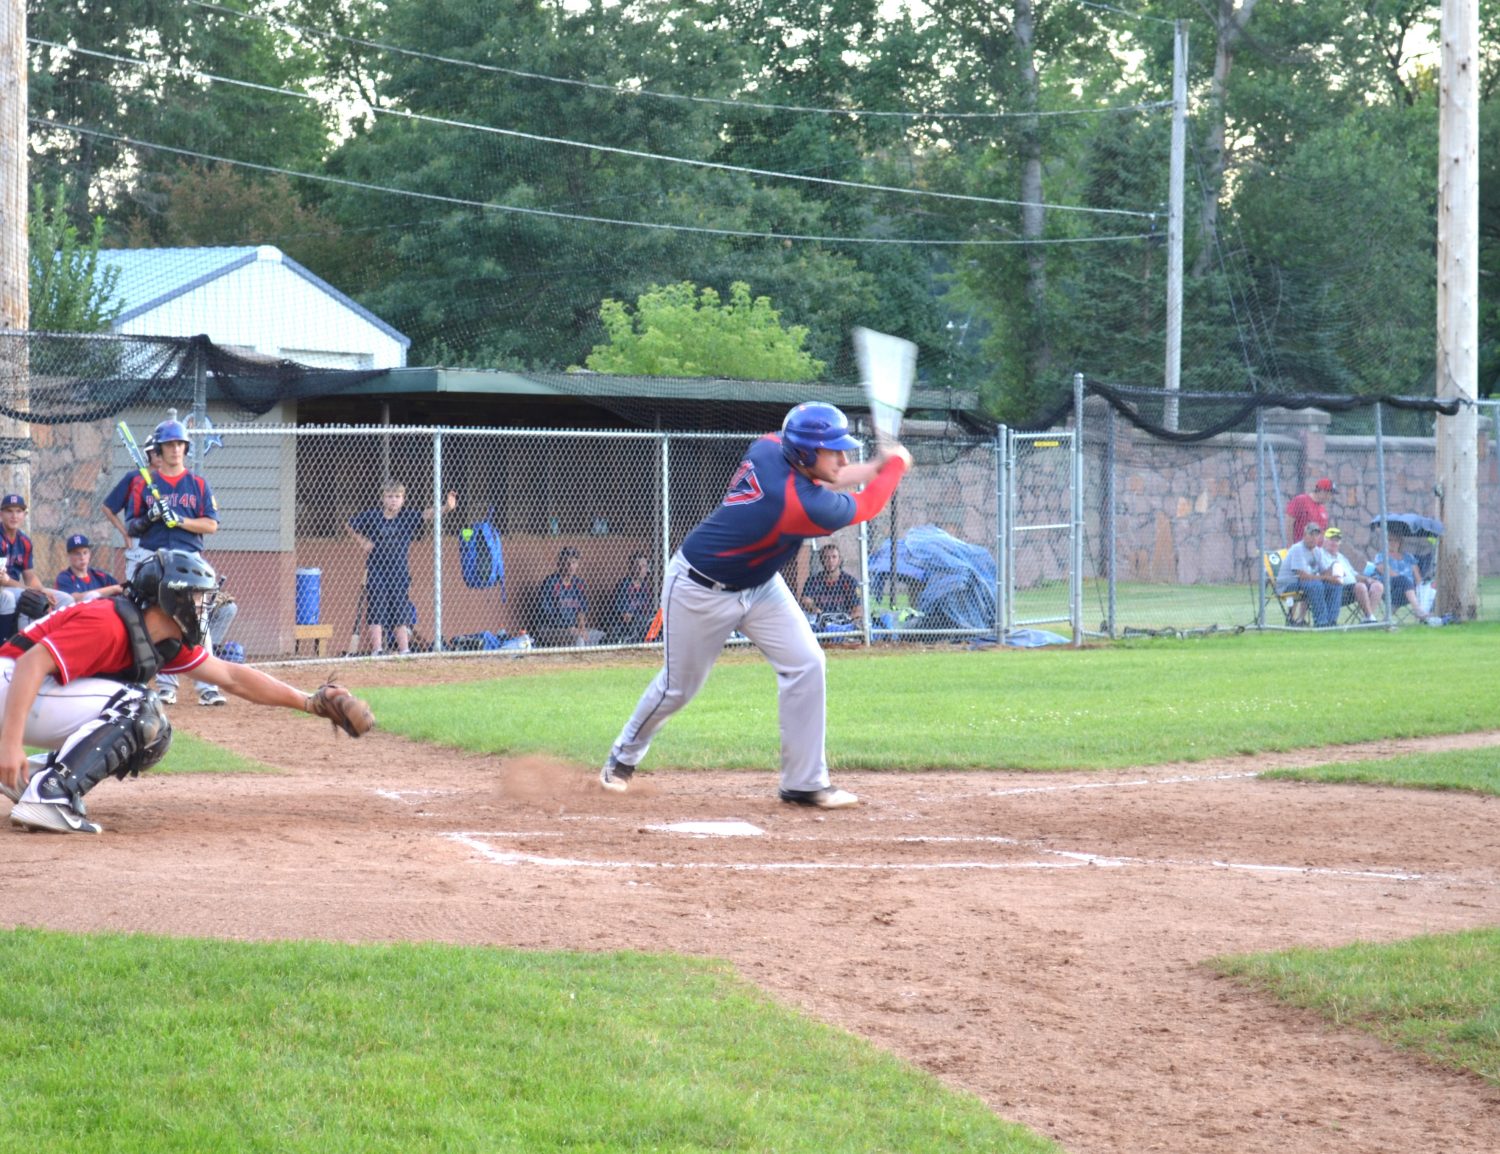 Closely played game ends in Post 46 loss